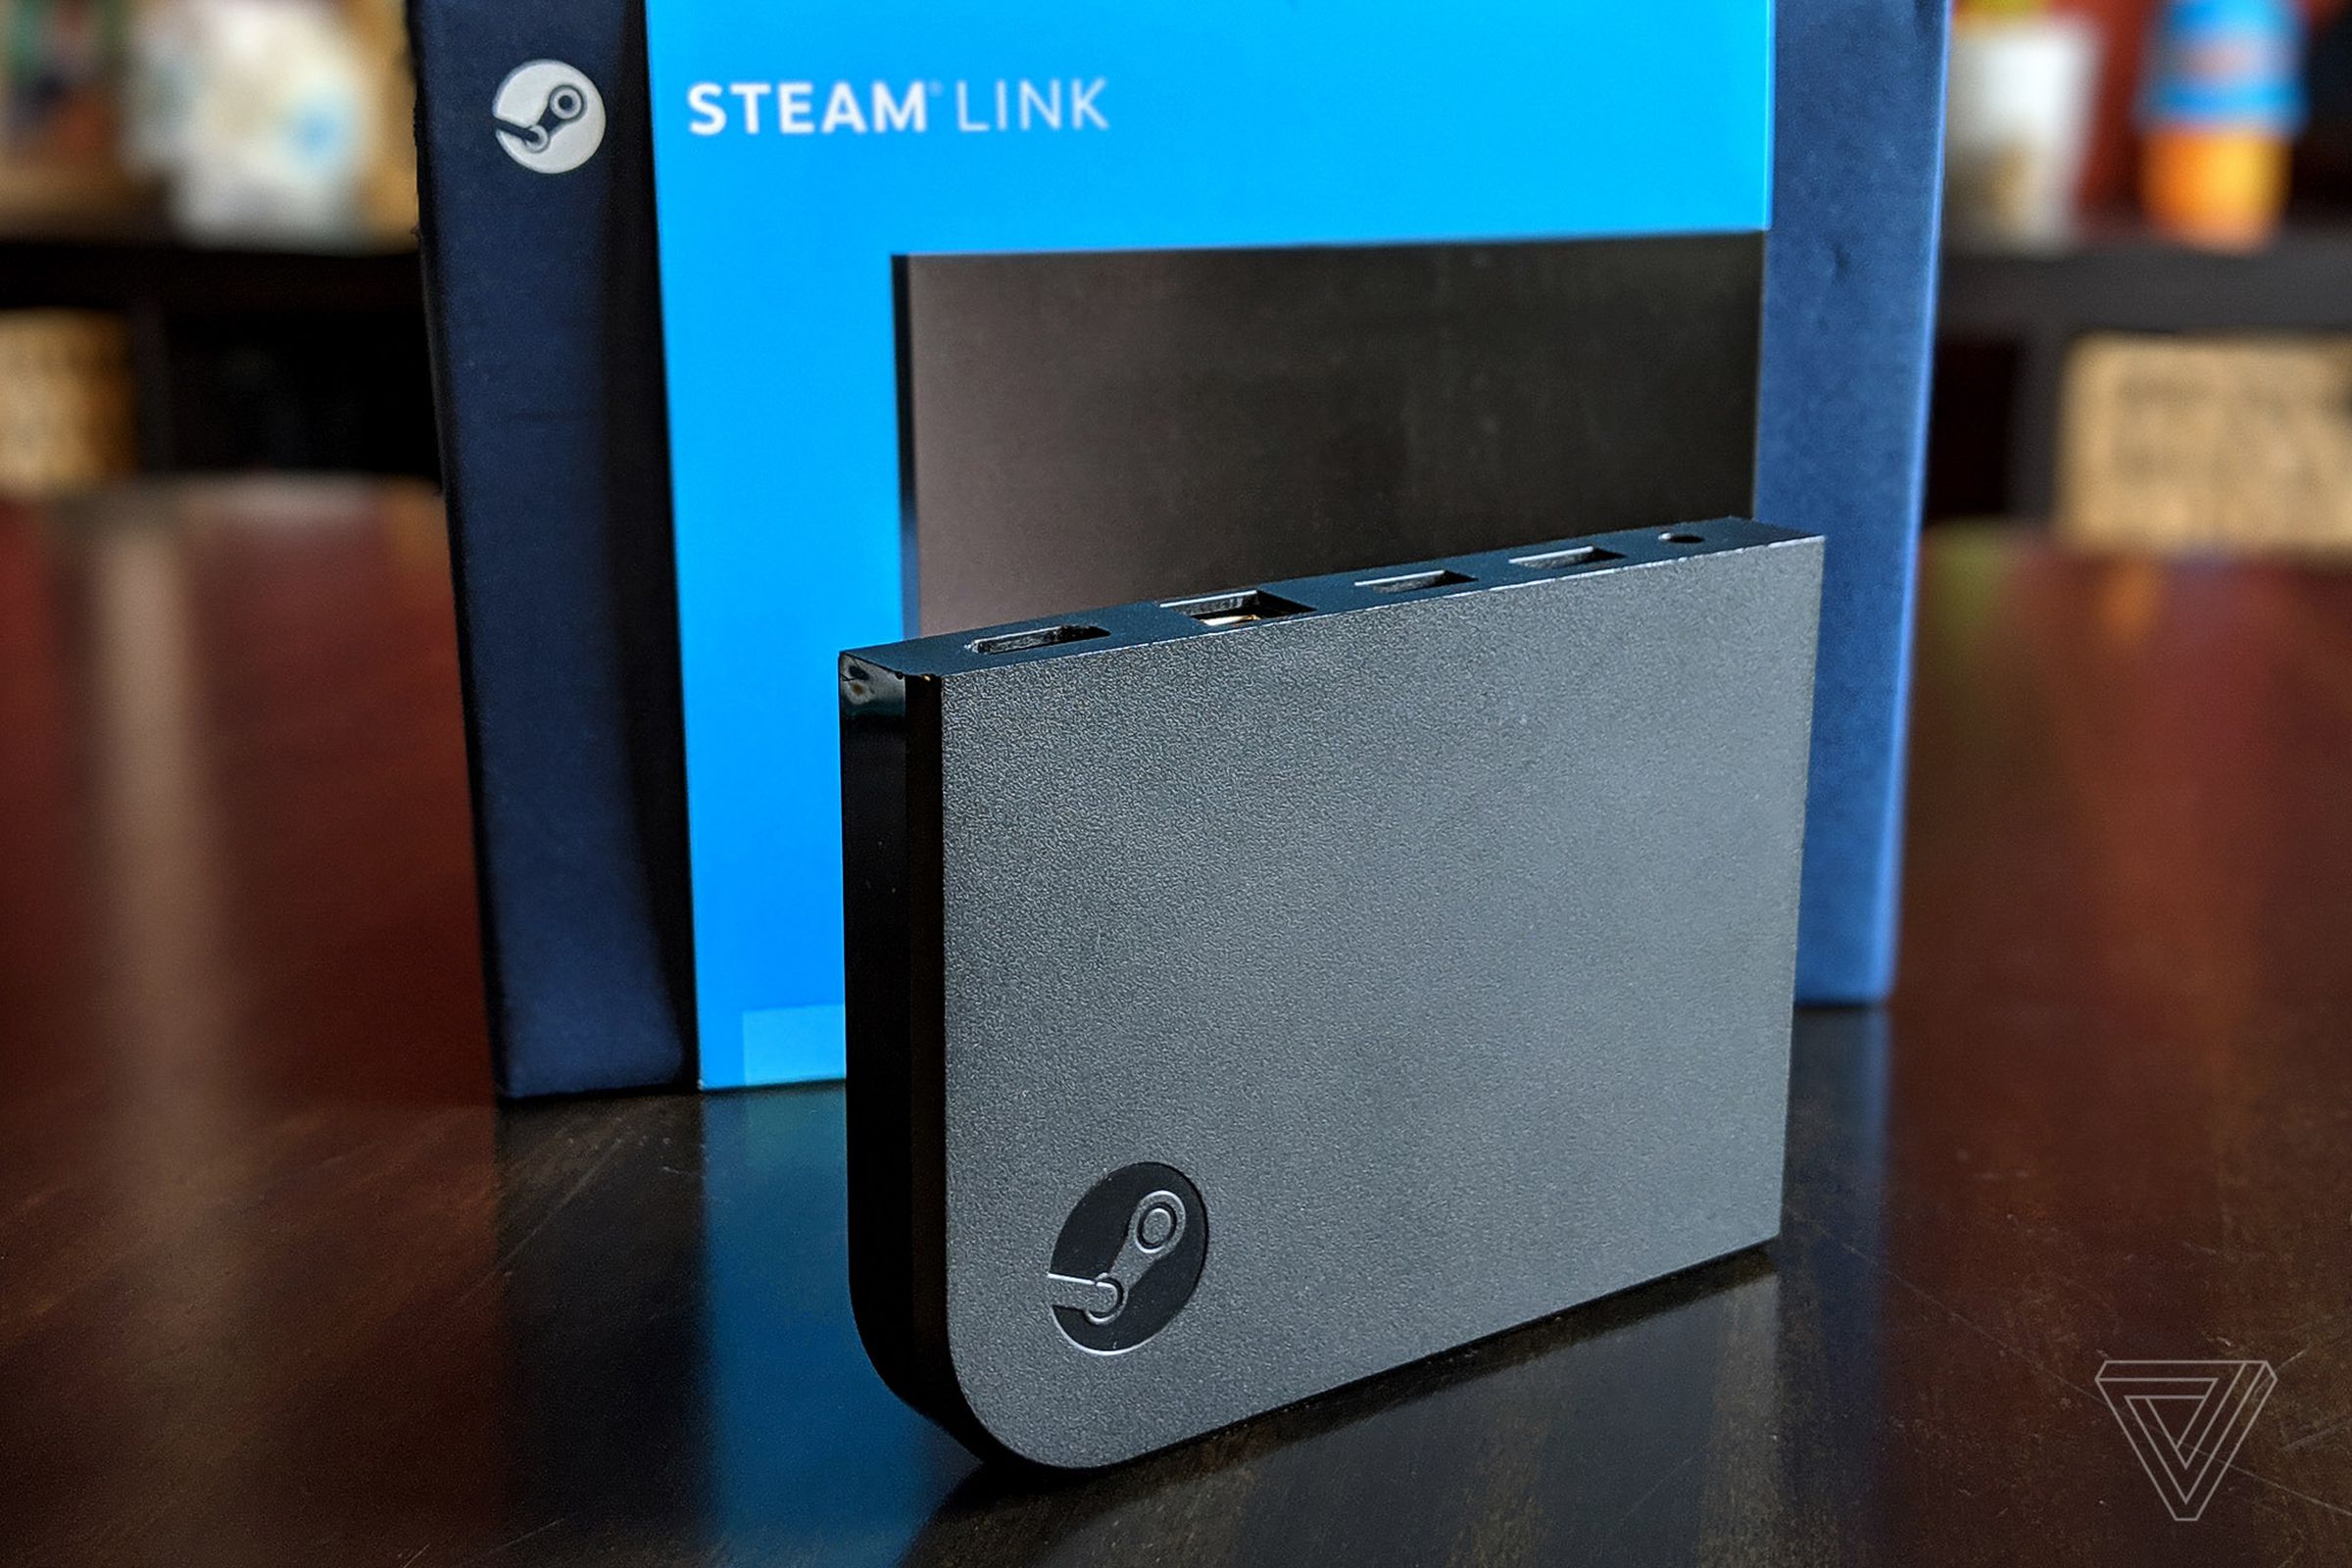 A photograph of a Steam Link besides its packaging on a wooden table.